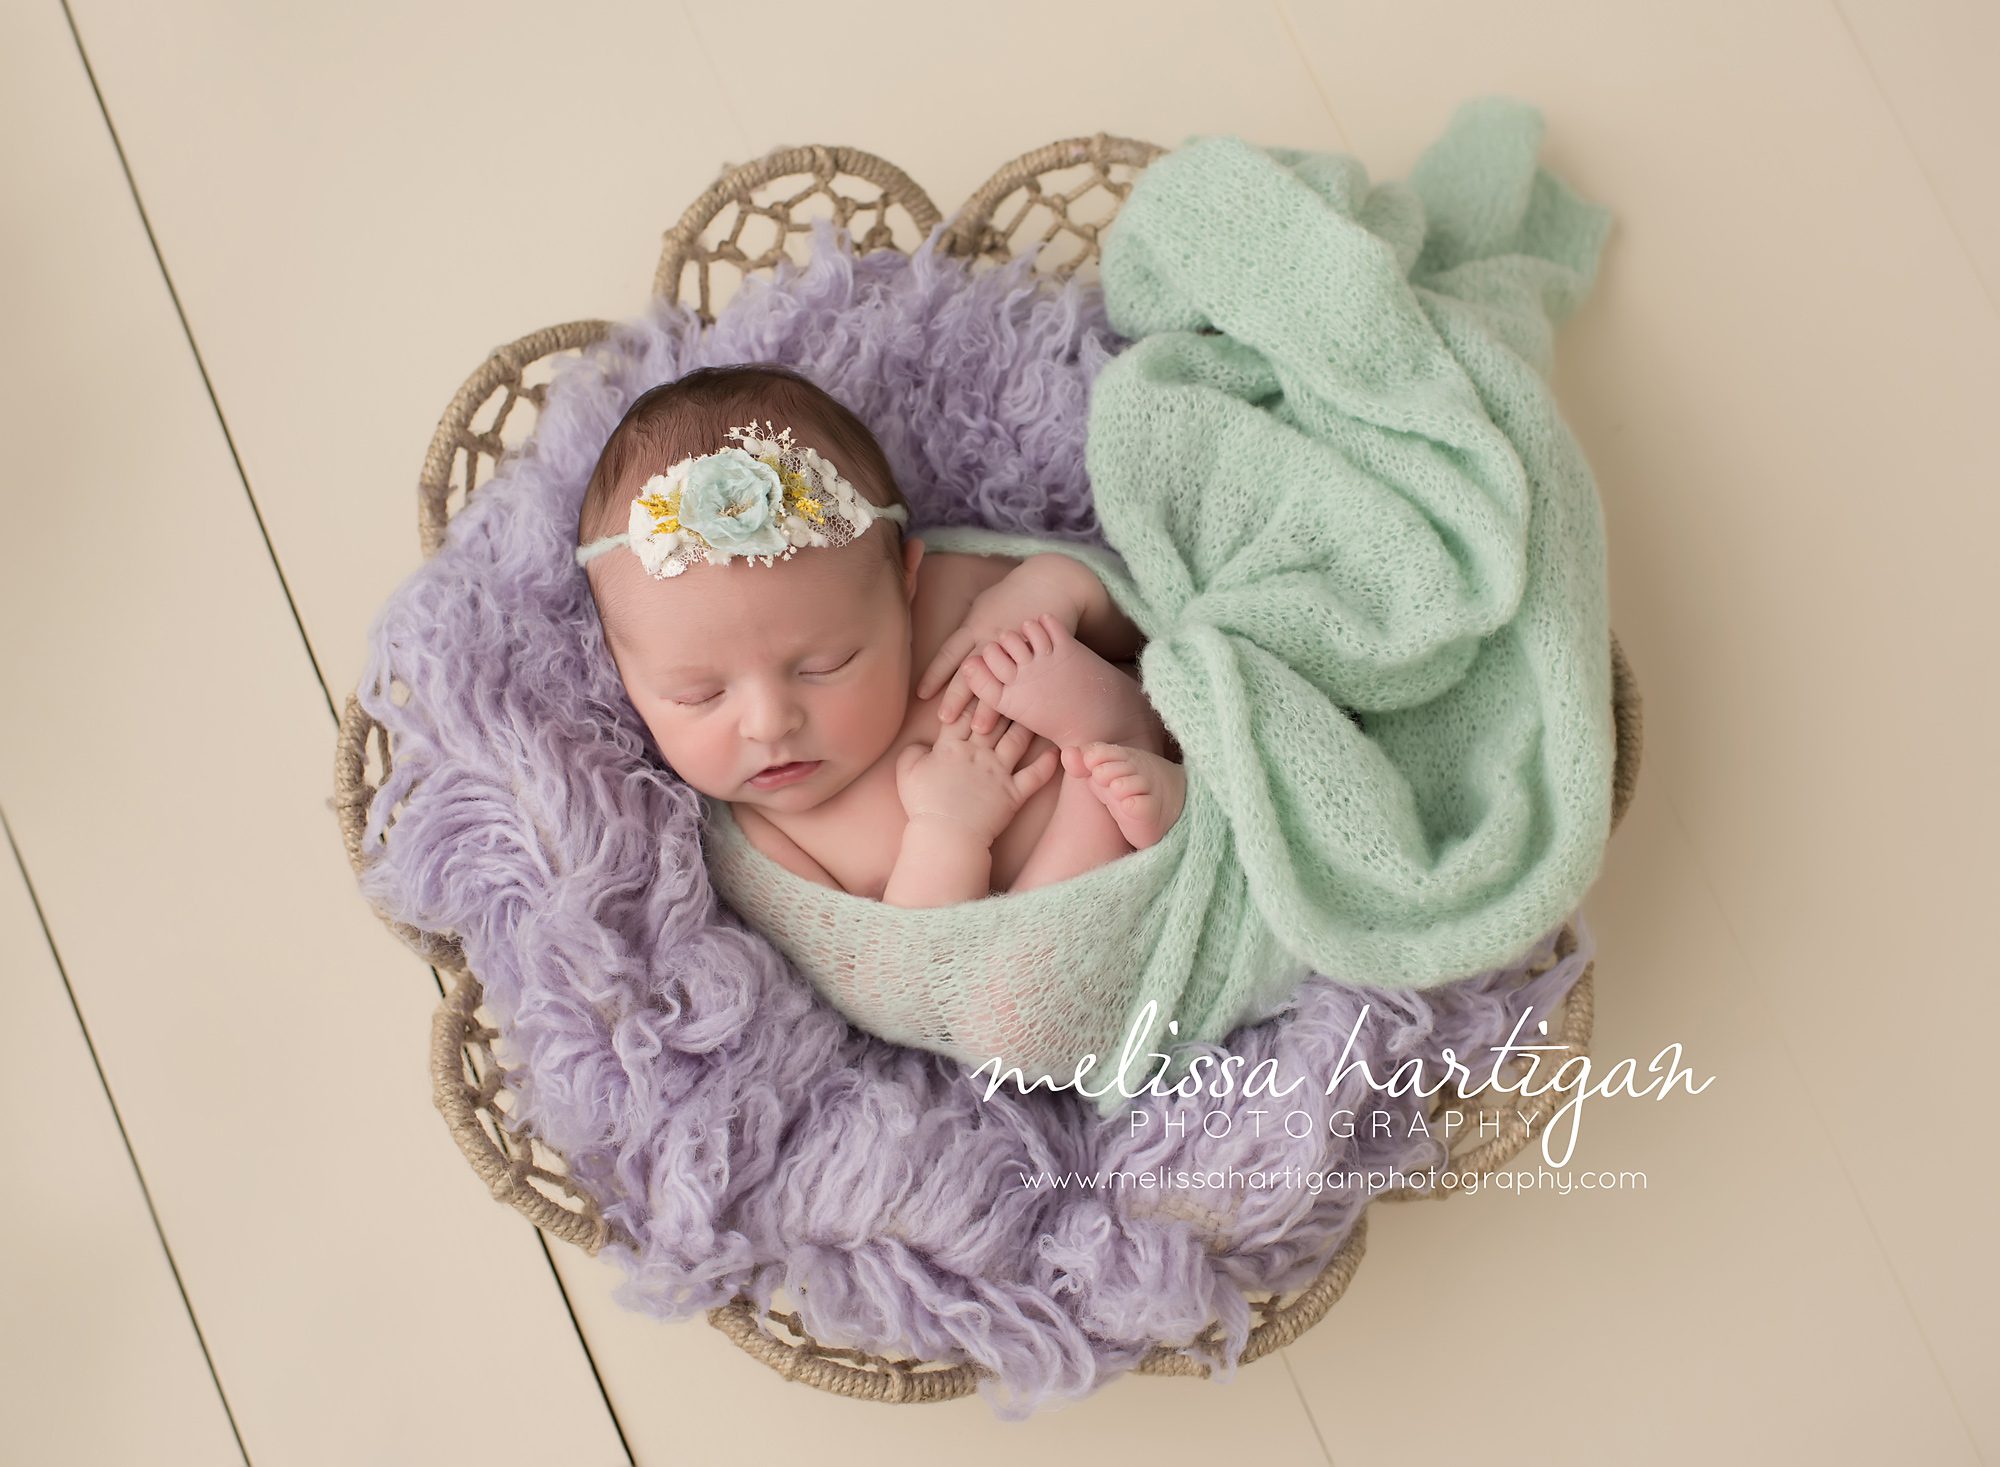 Baby girl posed in bowl with mini and lilac colored flokati